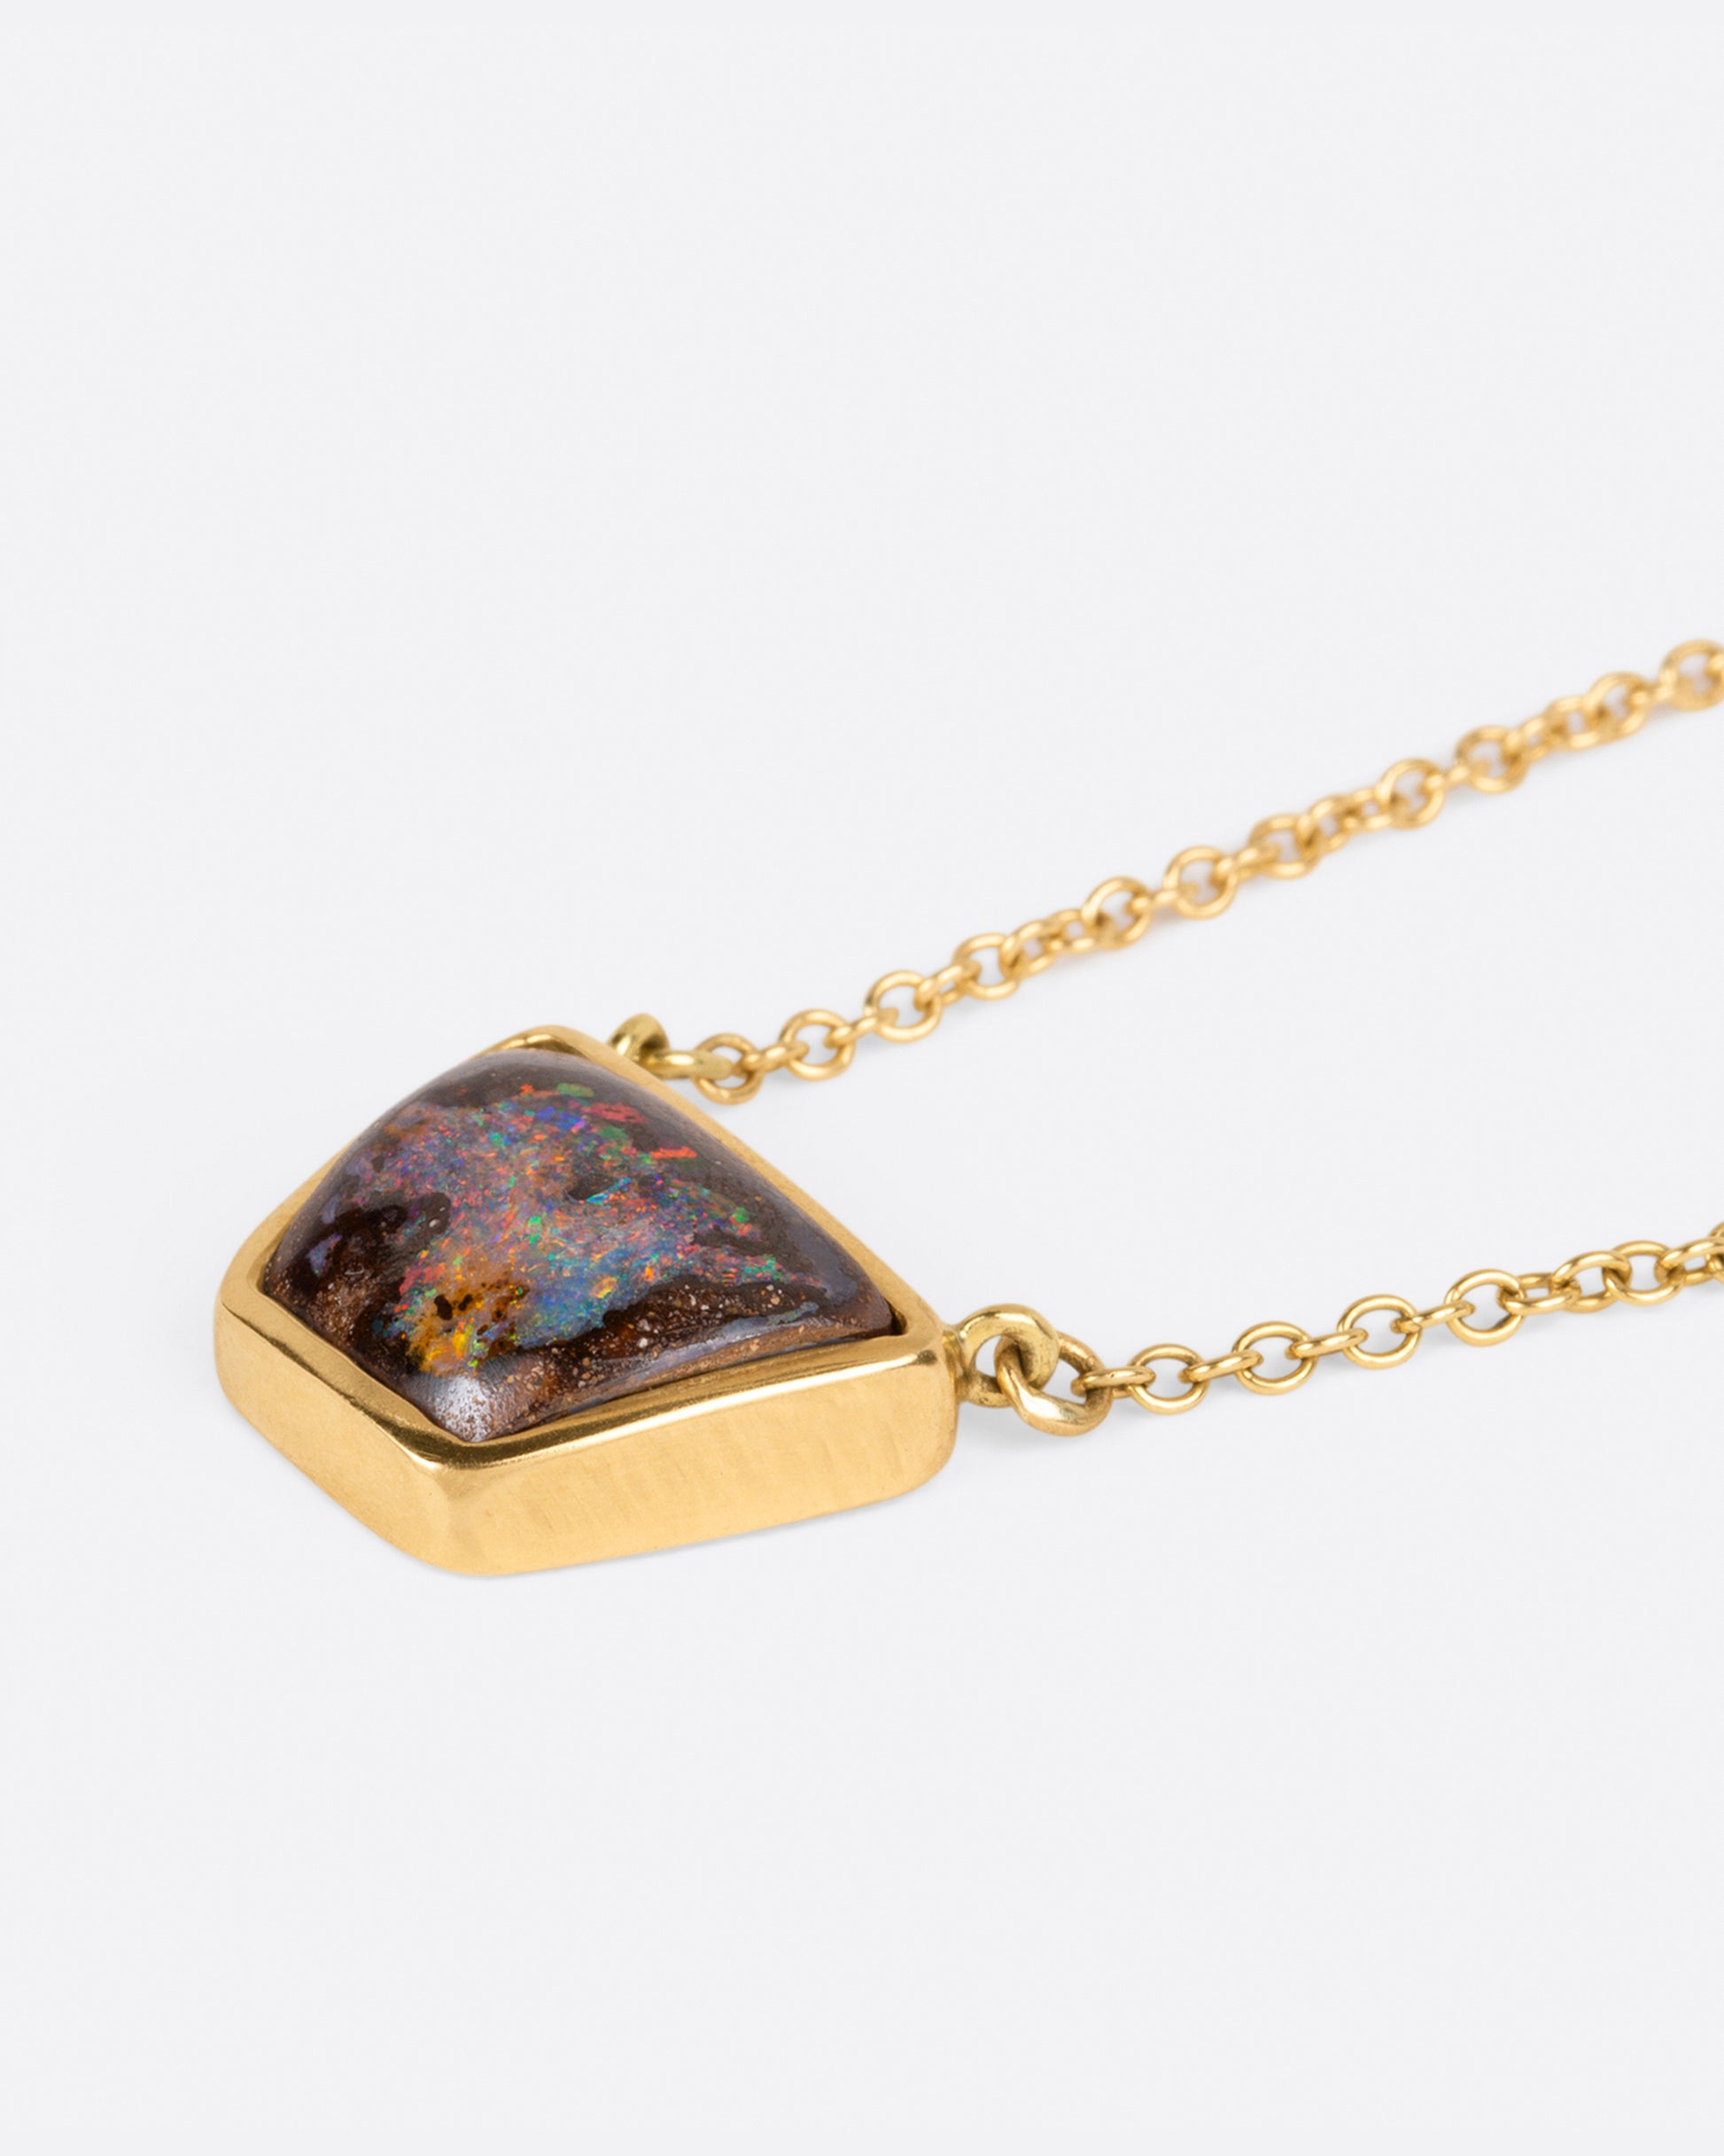 A flashy opalized wood is set in a simple bezel setting so the stone remains the star of this necklace.